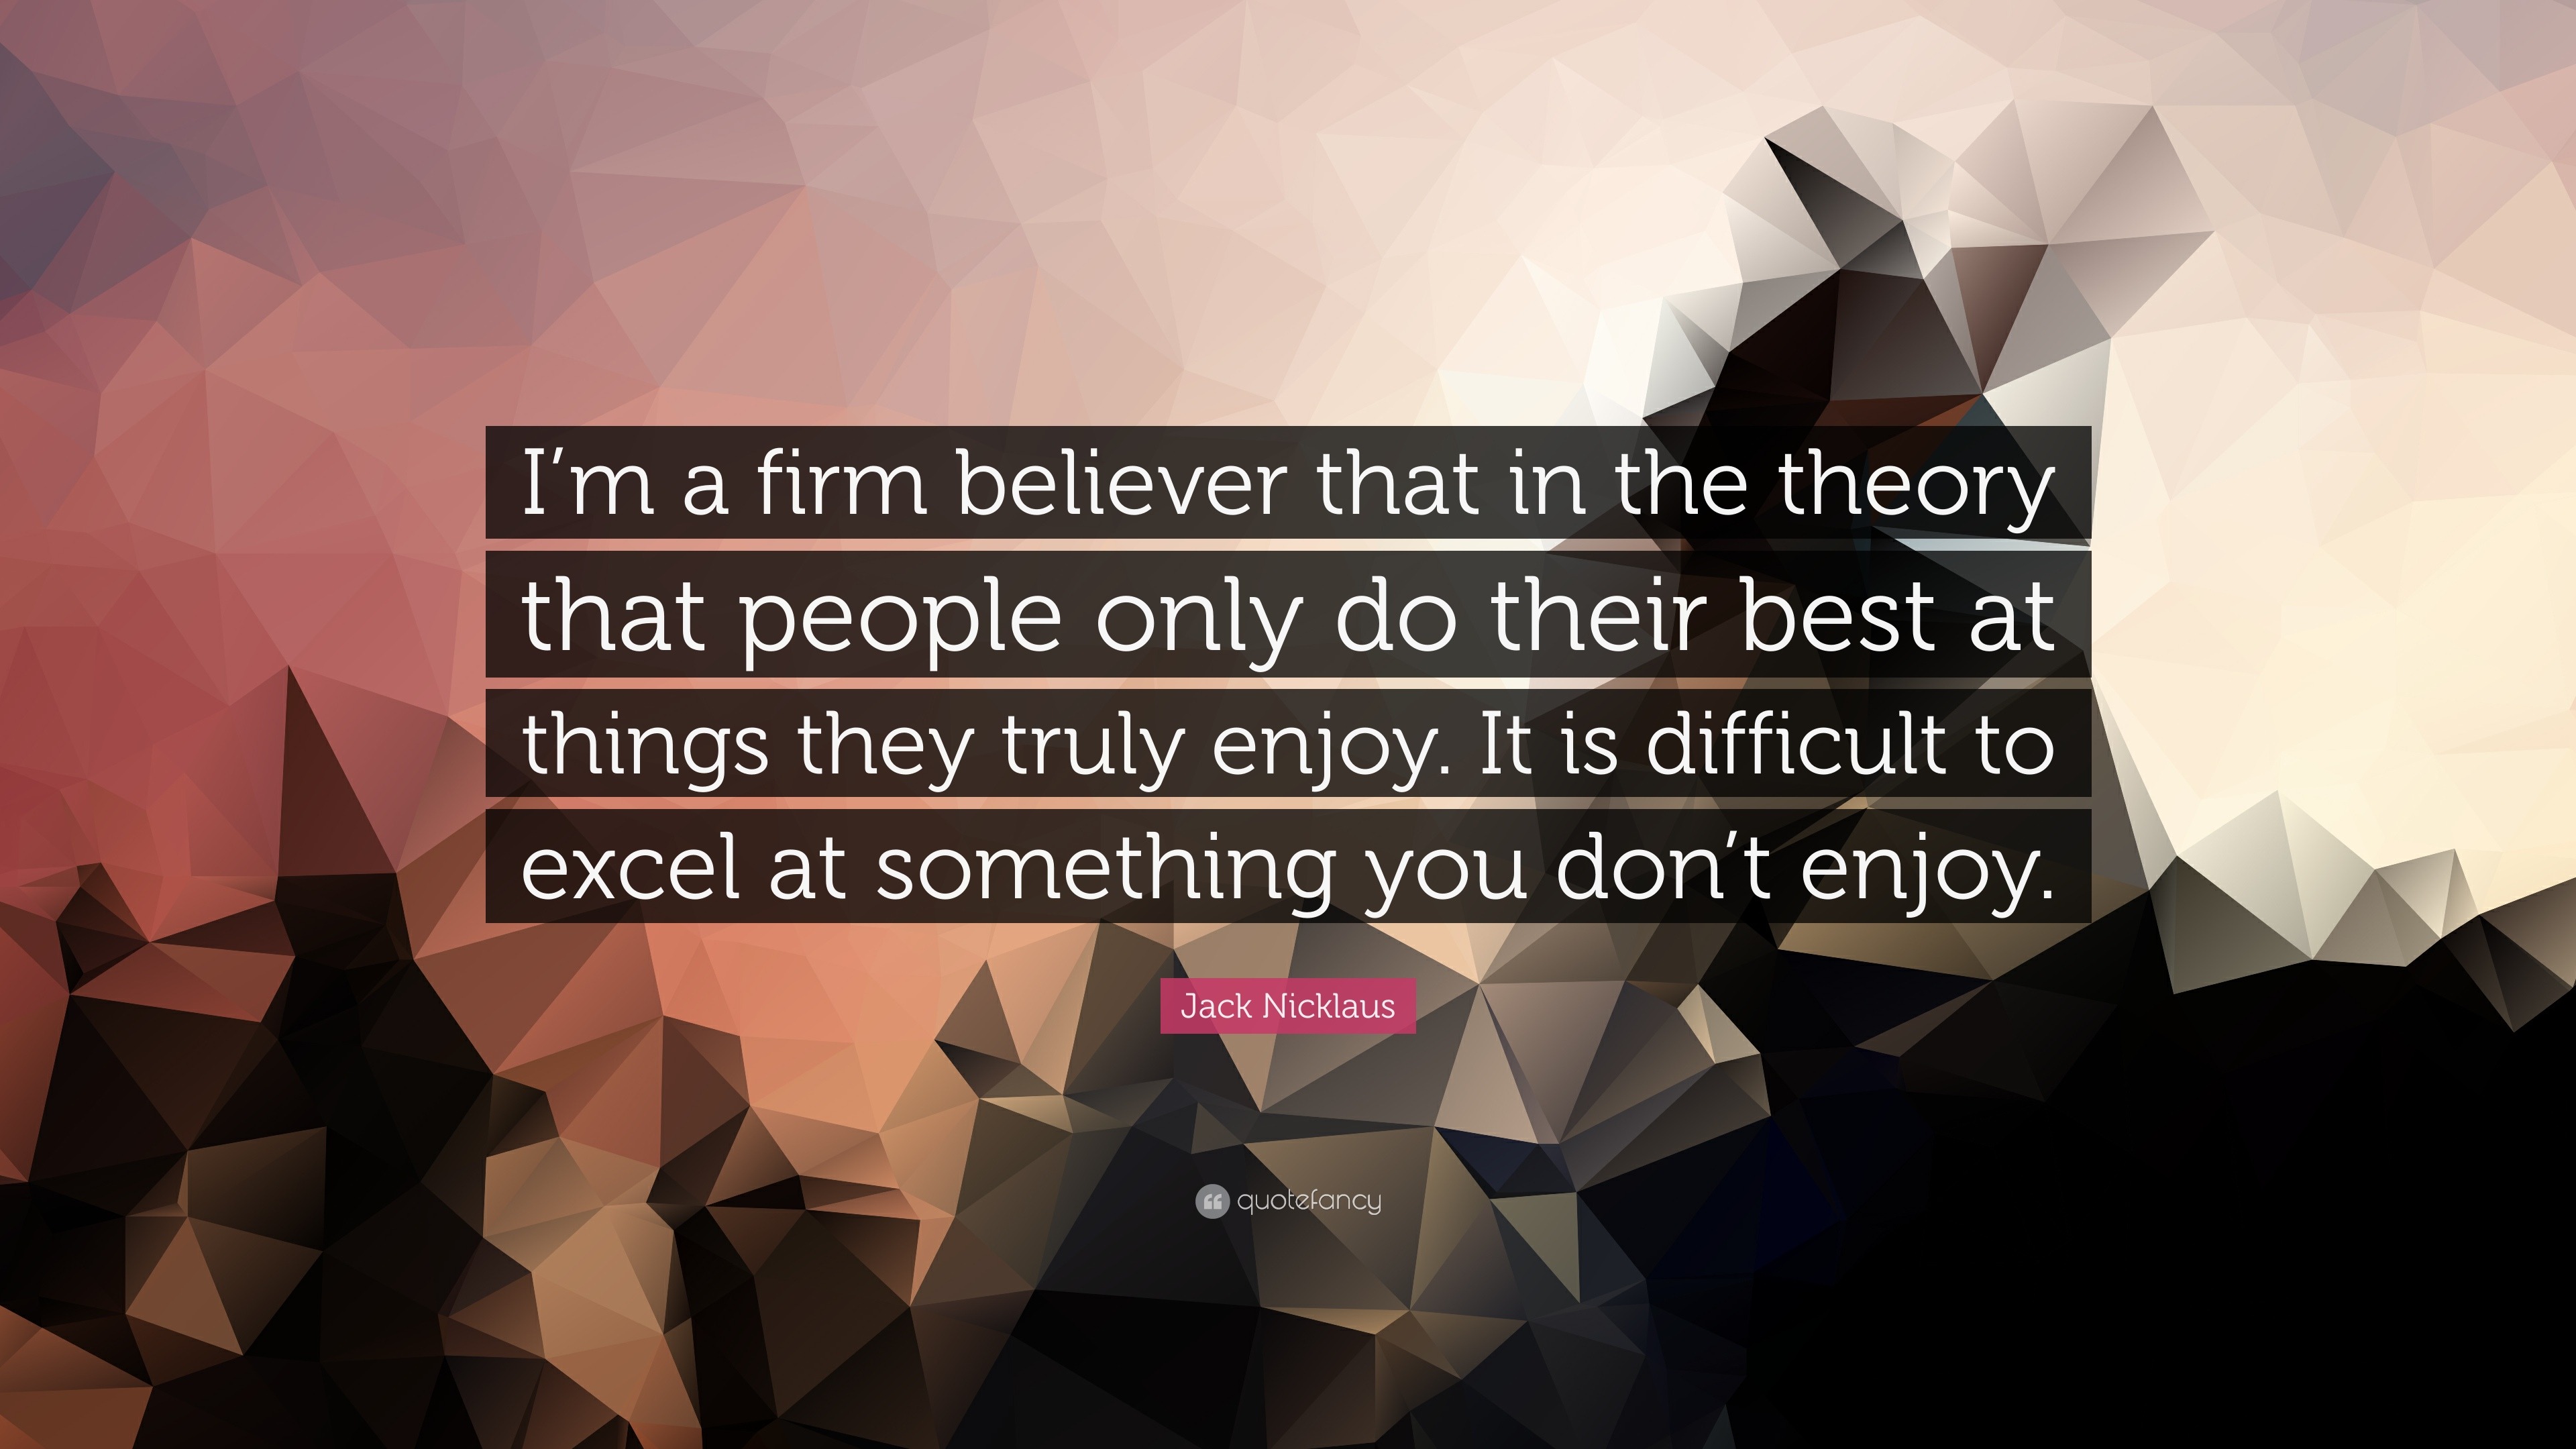 https://quotefancy.com/media/wallpaper/3840x2160/705487-Jack-Nicklaus-Quote-I-m-a-firm-believer-that-in-the-theory-that.jpg